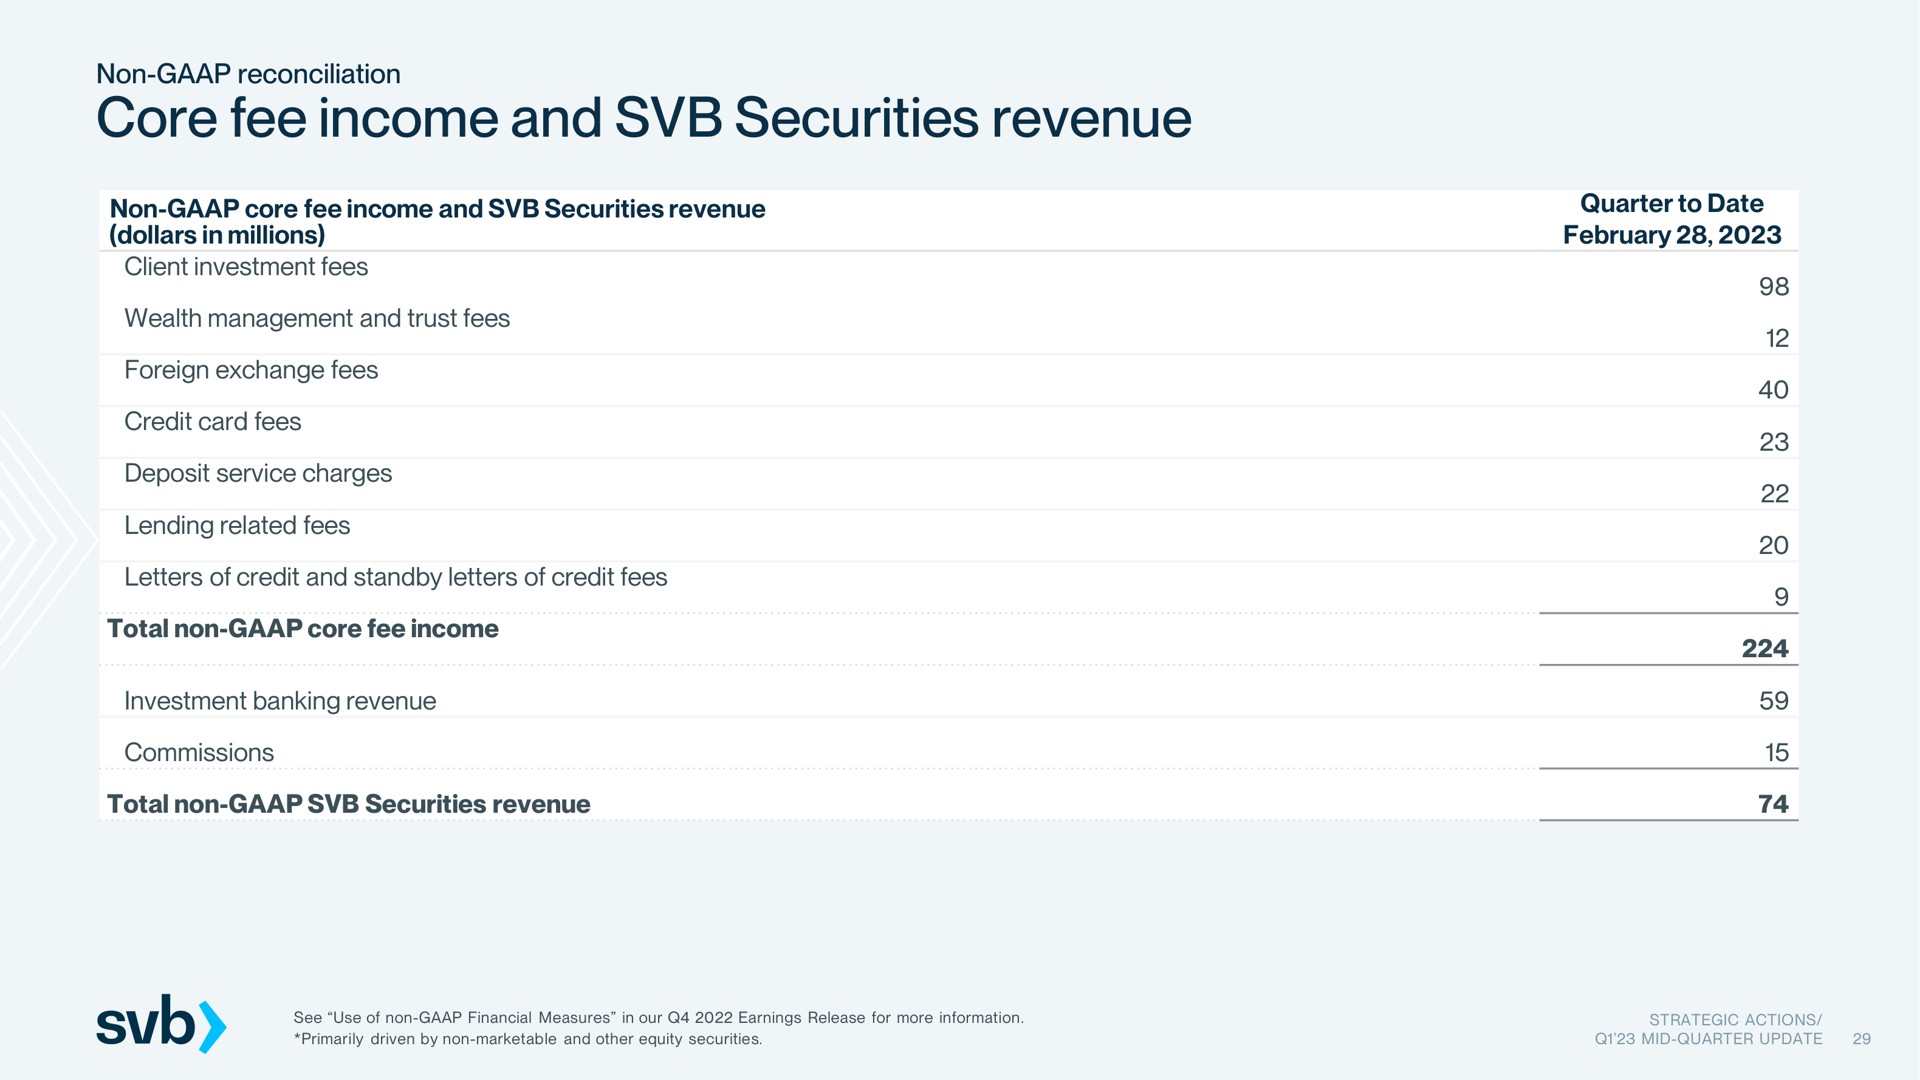 core fee income and securities revenue | Silicon Valley Bank